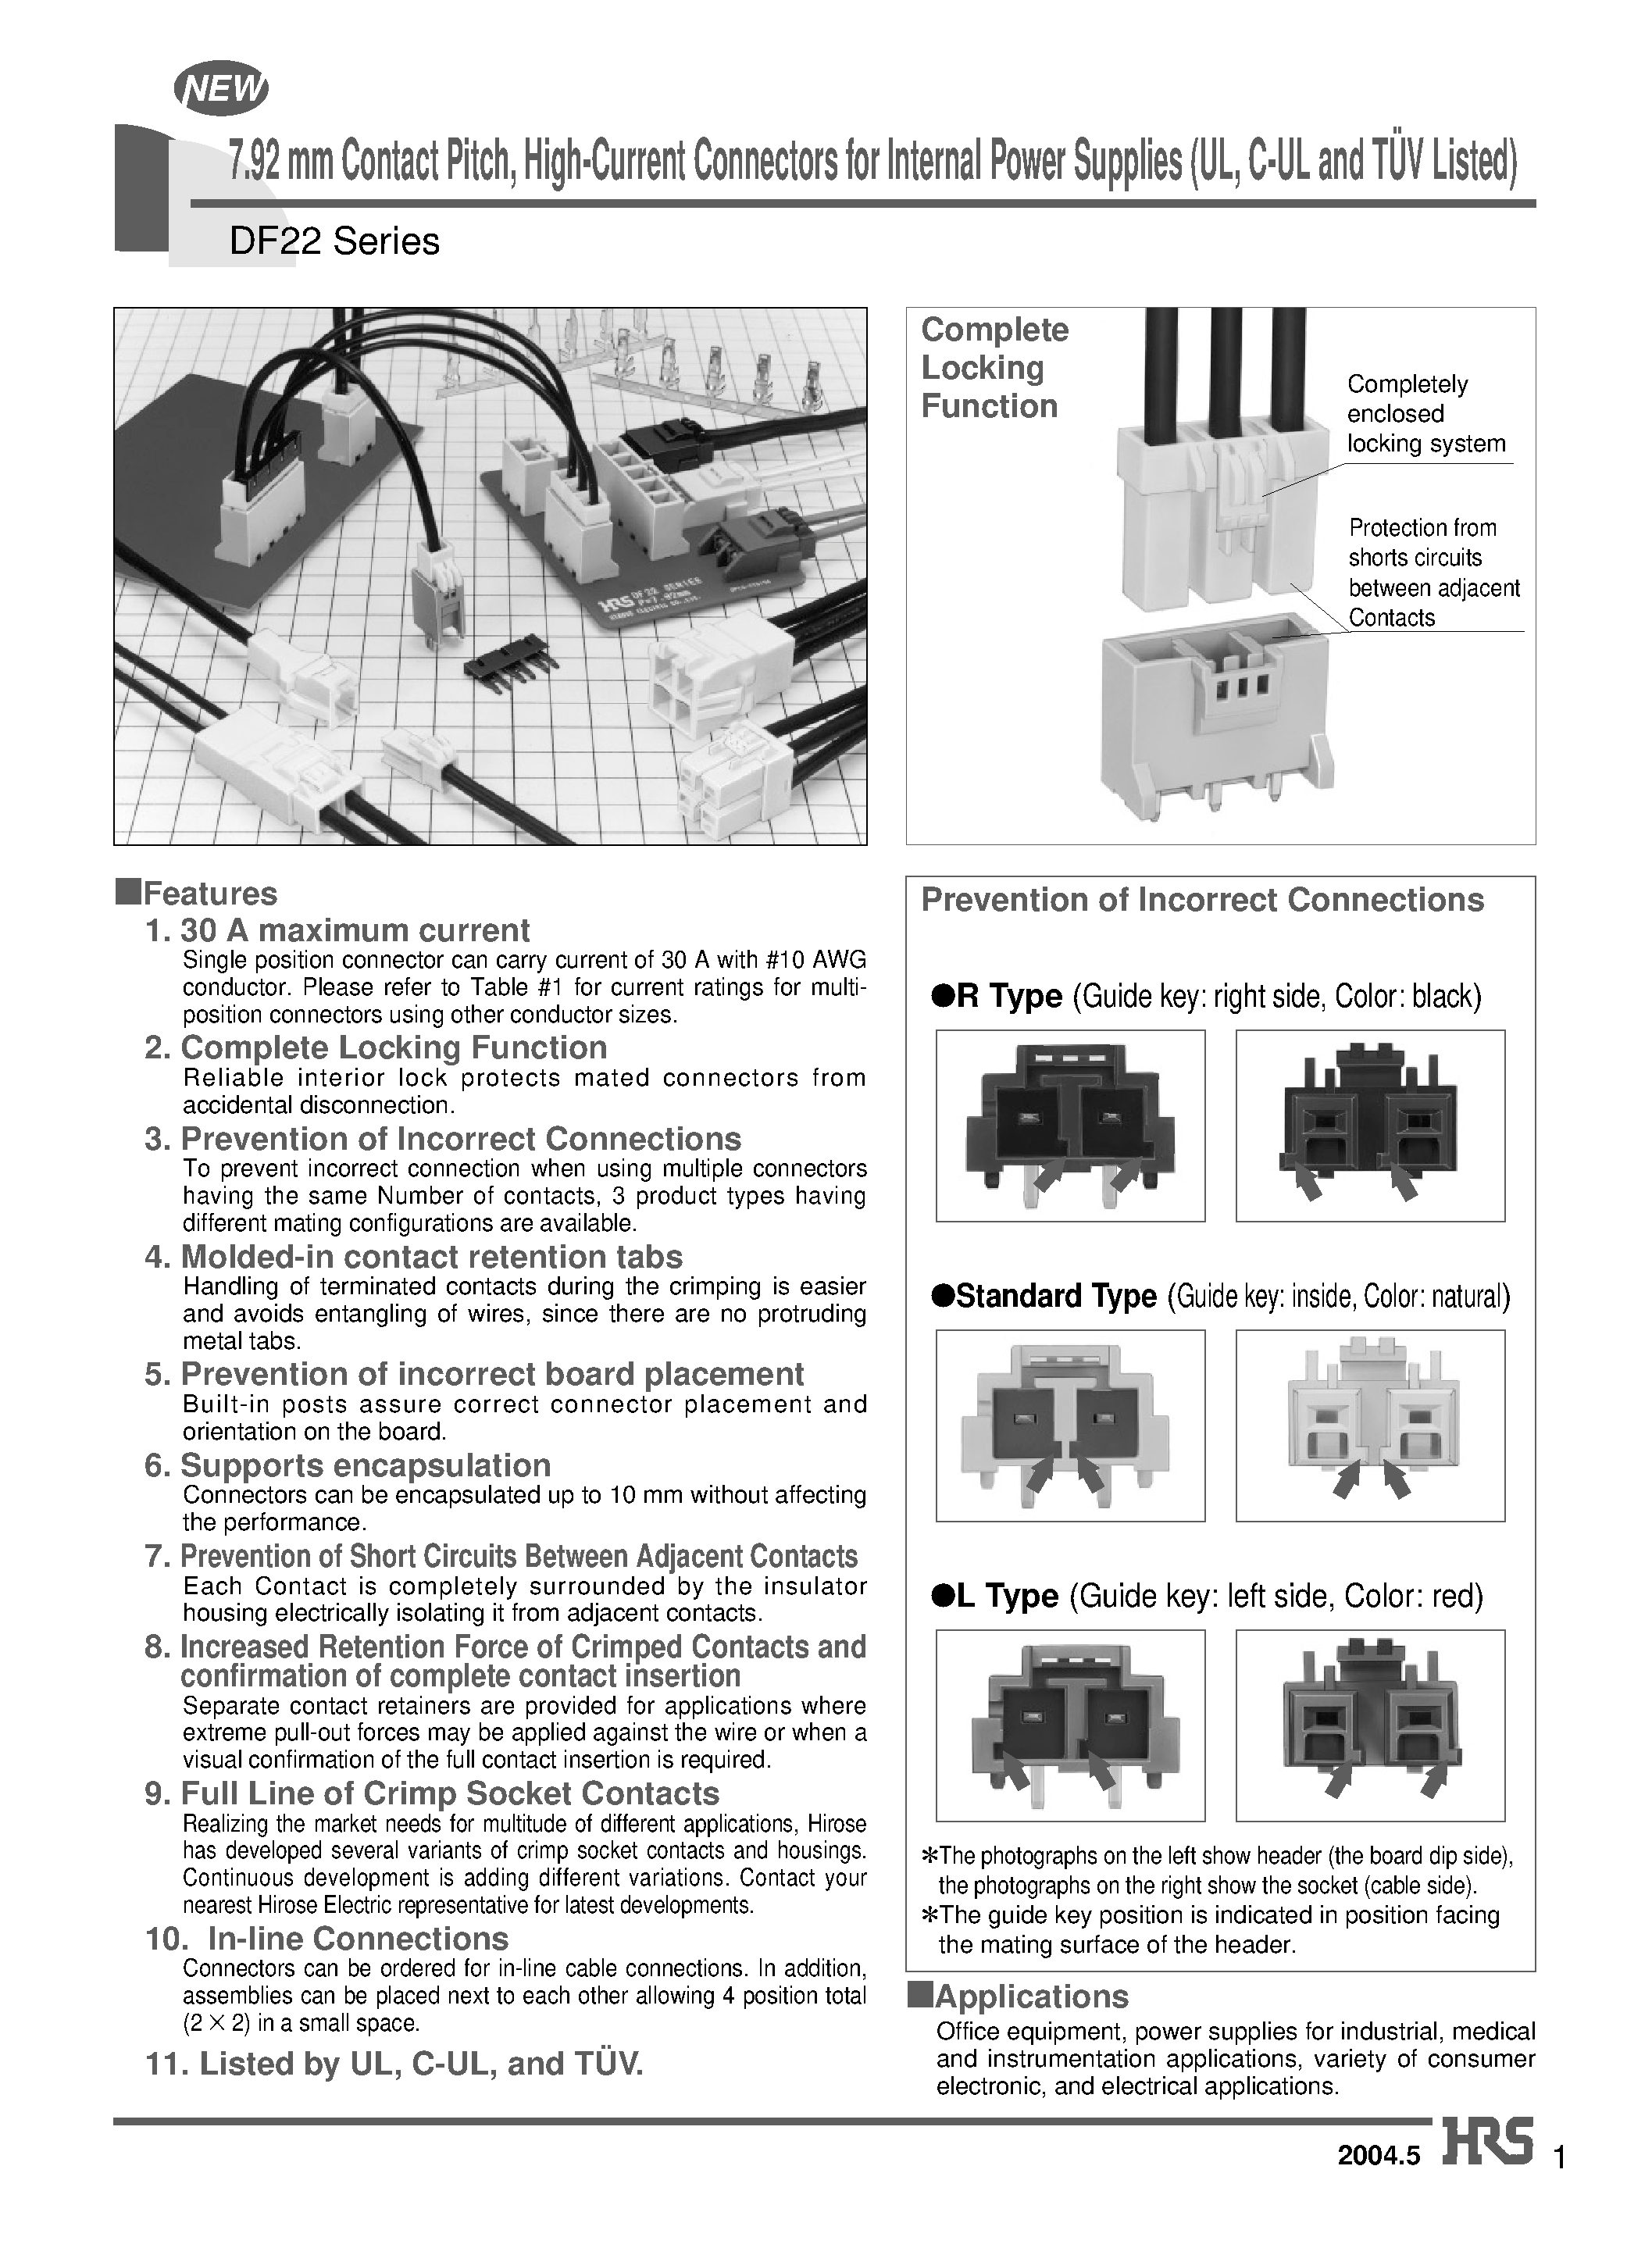 Datasheet DF22A-2P-7.92C - 7.92 mm Contact Pitch/ High-Current Connectors for Internal Power Supplies (UL/ C-UL and TUV Listed) page 1